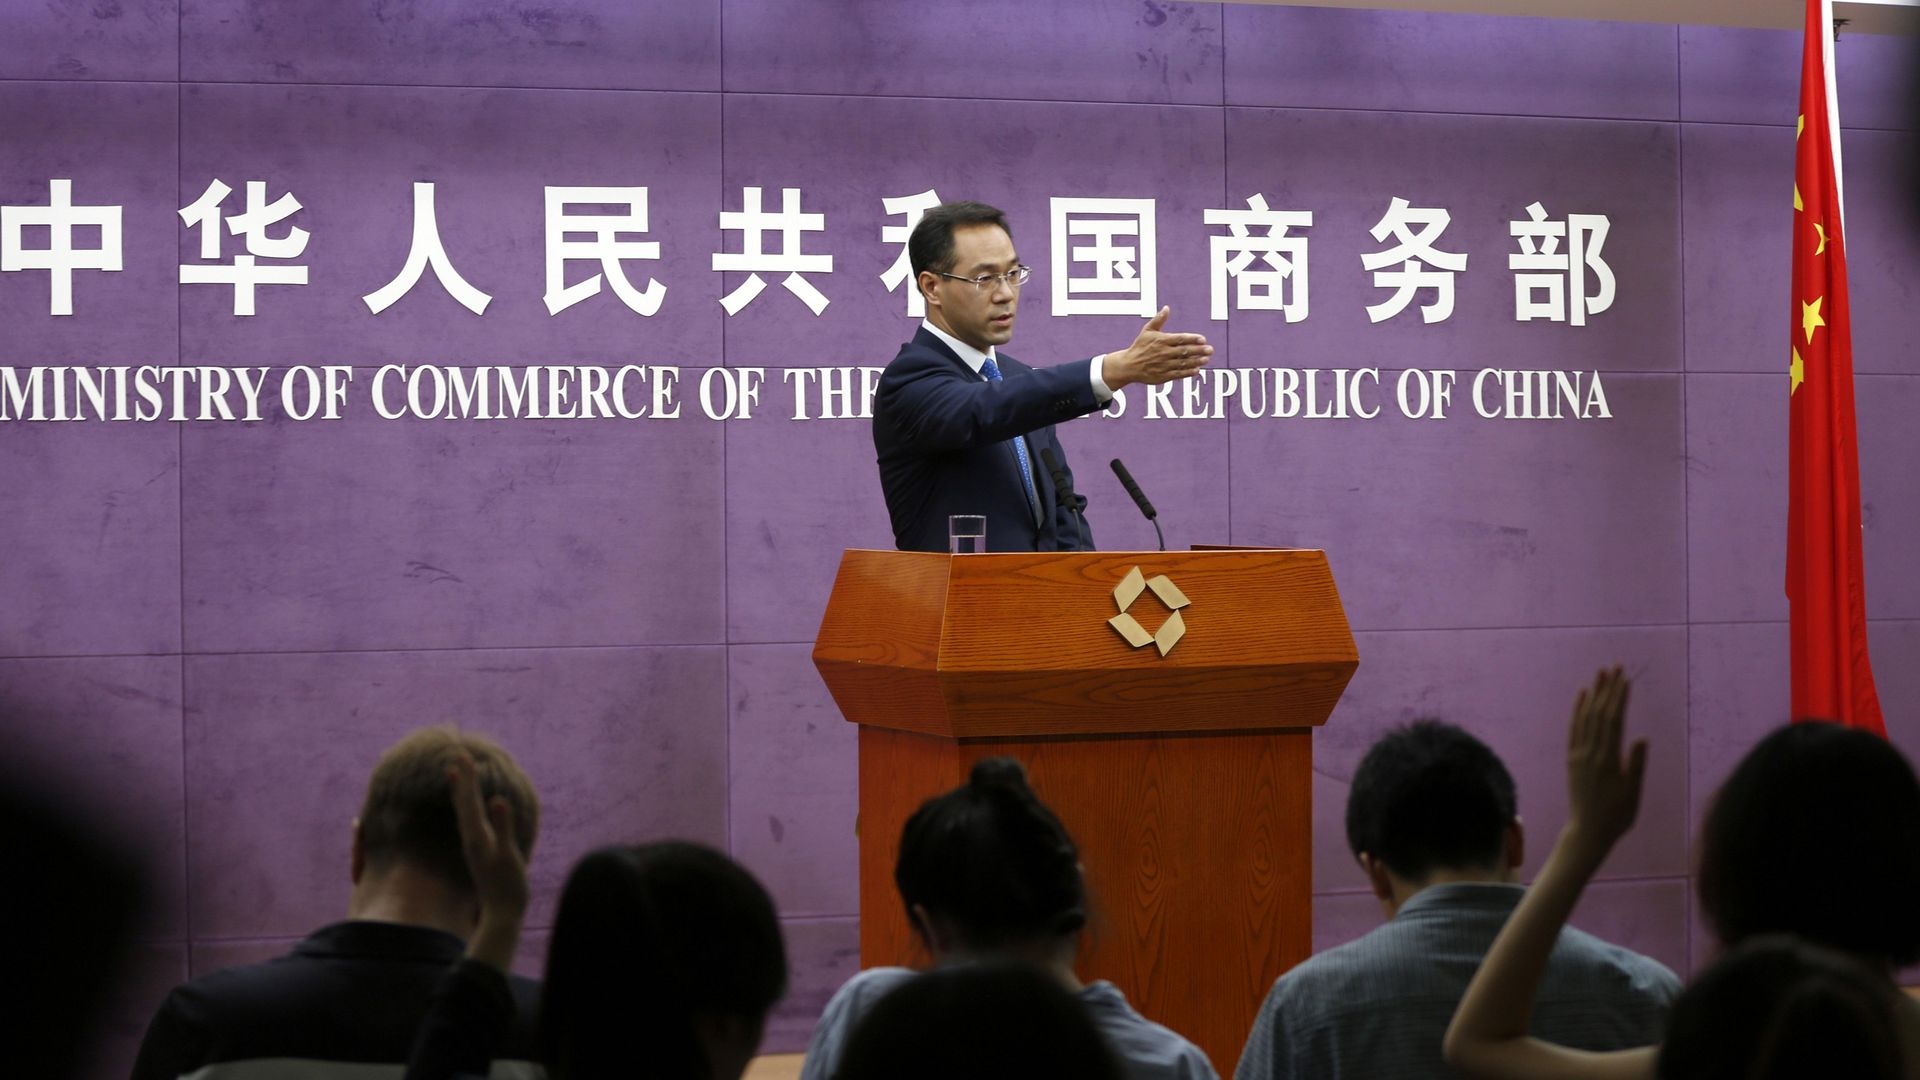 China commerce ministry spokesman at a press conference